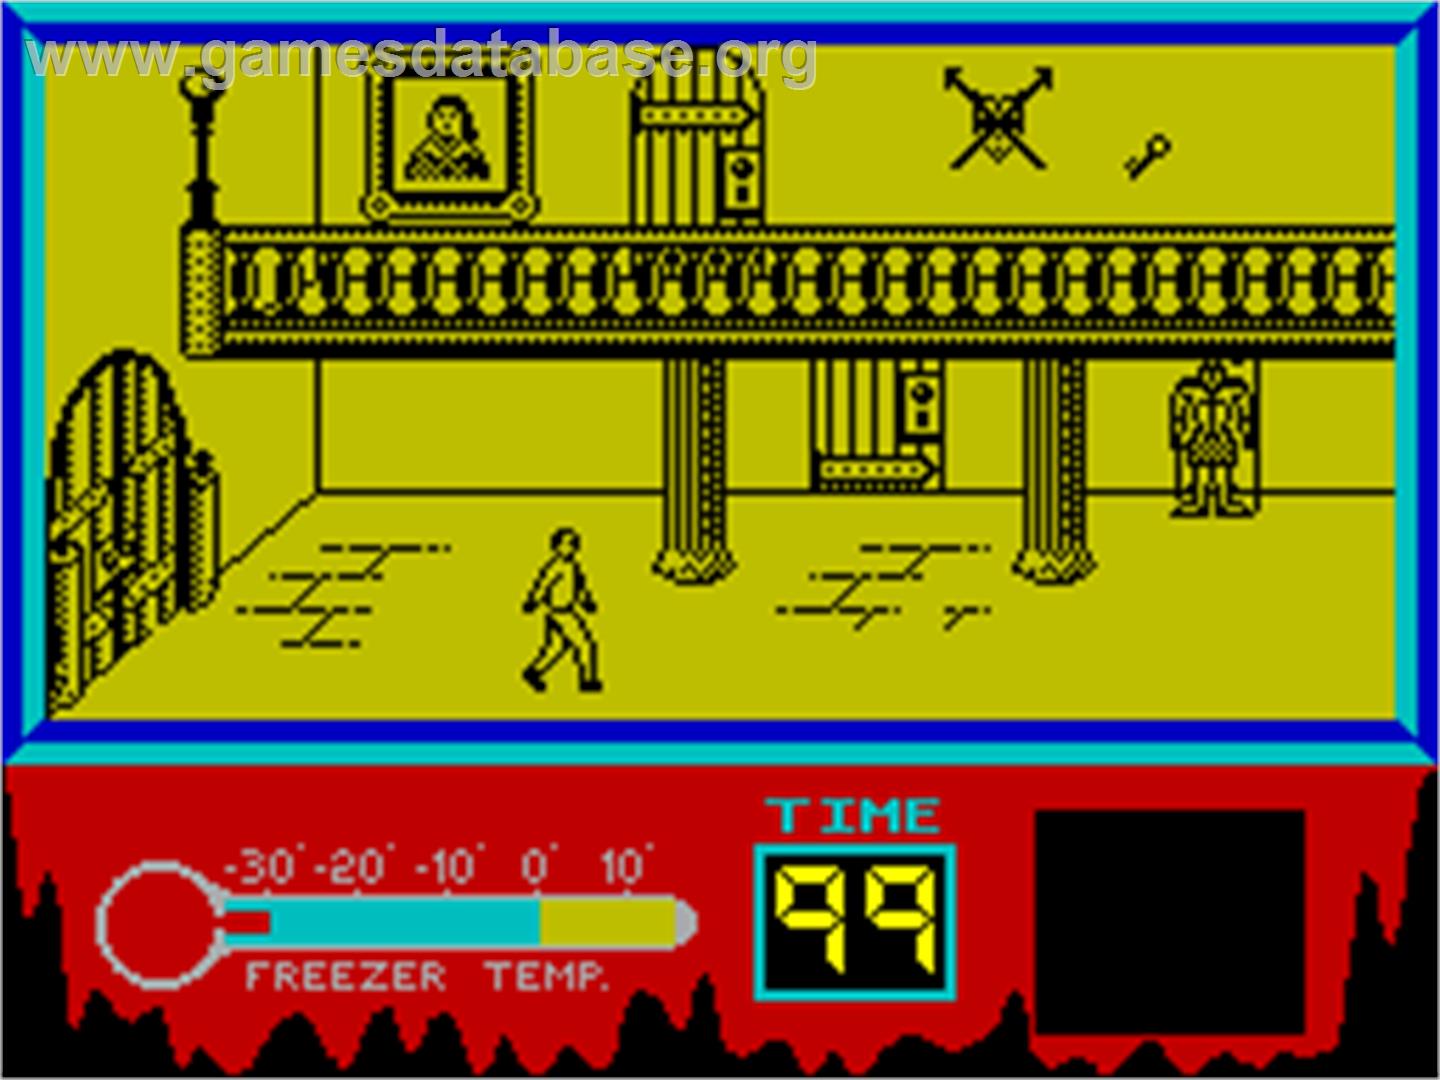 The Rocky Horror Show - Sinclair ZX Spectrum - Artwork - In Game